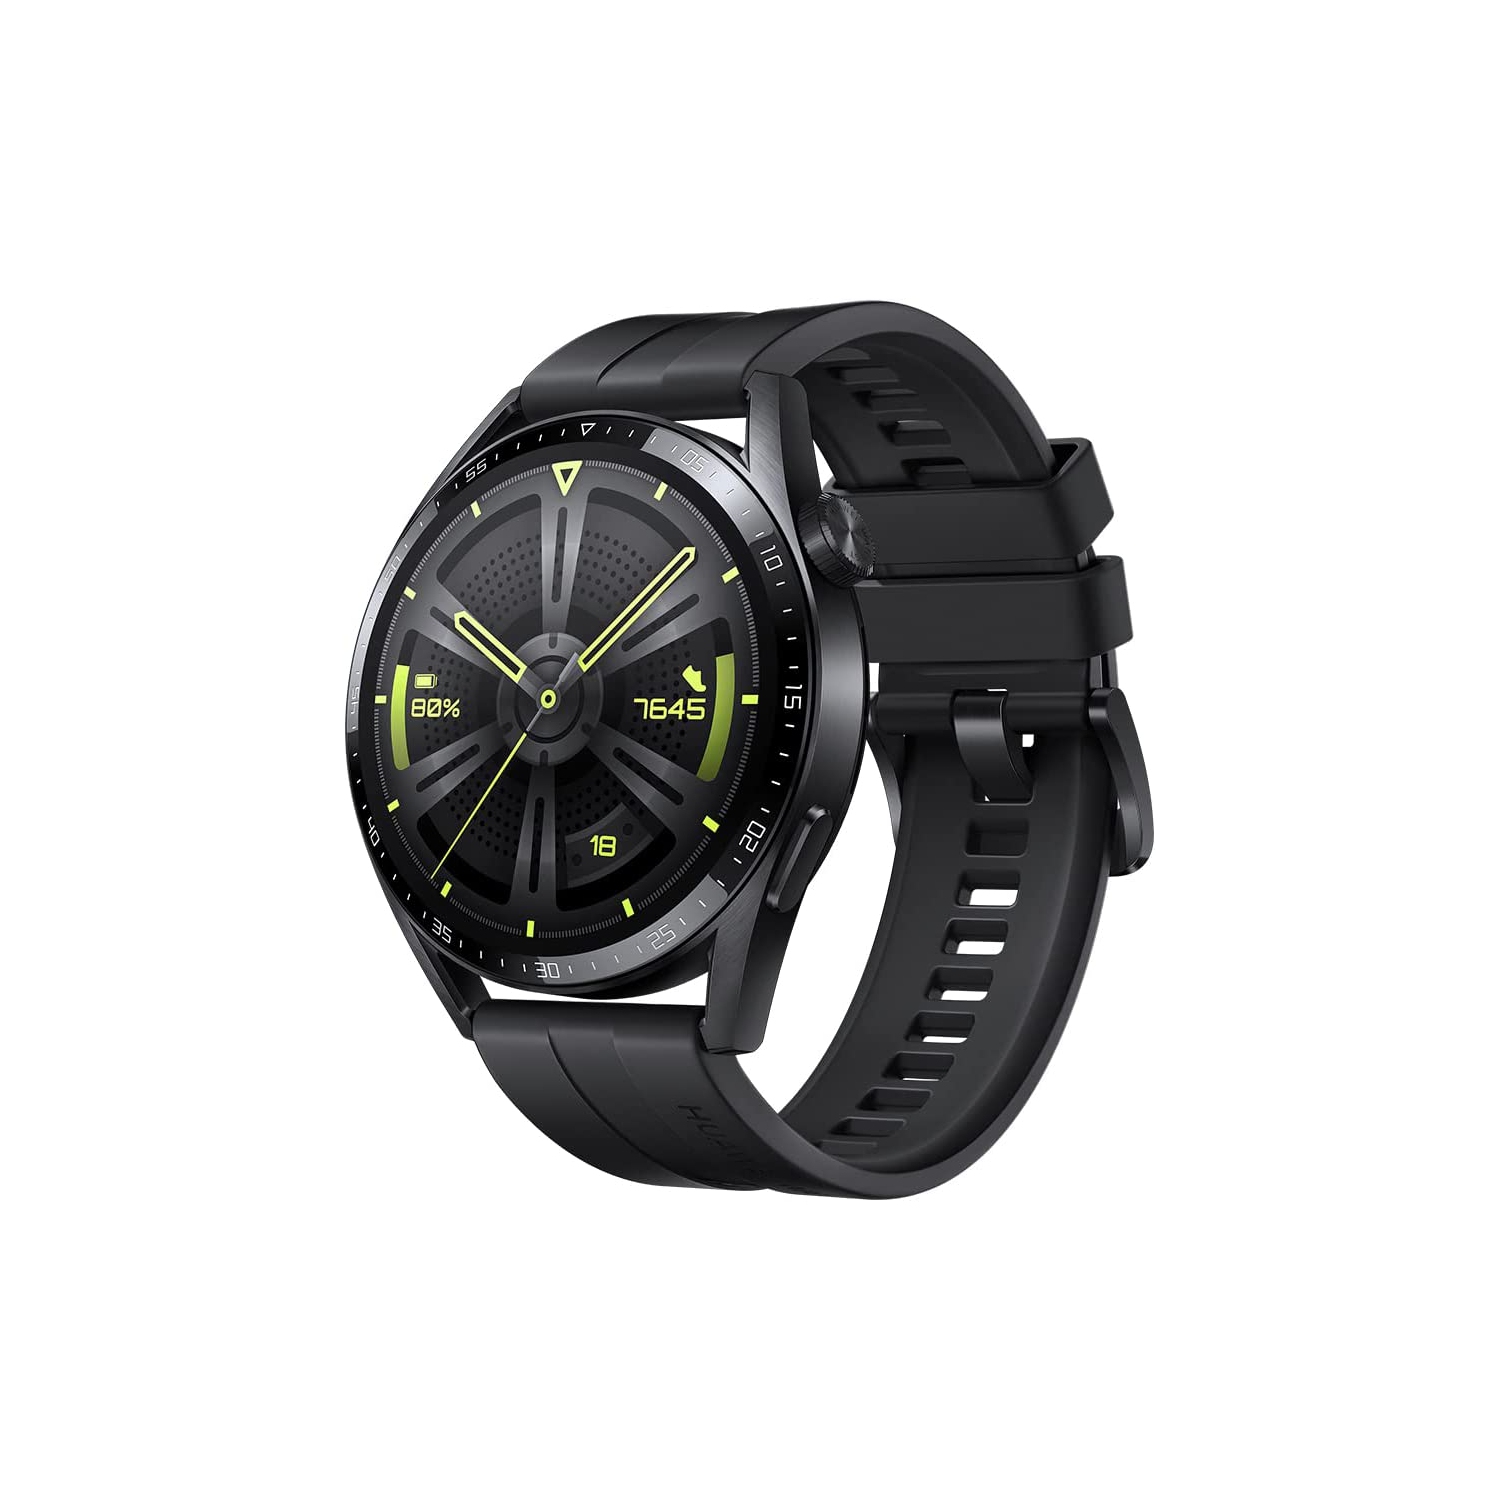 HUAWEI Watch GT 3 Smartwatch - Durable Battery, All-Day SpO2 & Heart Rate Monitoring, 100+ Workout Modes, Bluetooth Calling, 46mm, Black _International Model_ Open Box